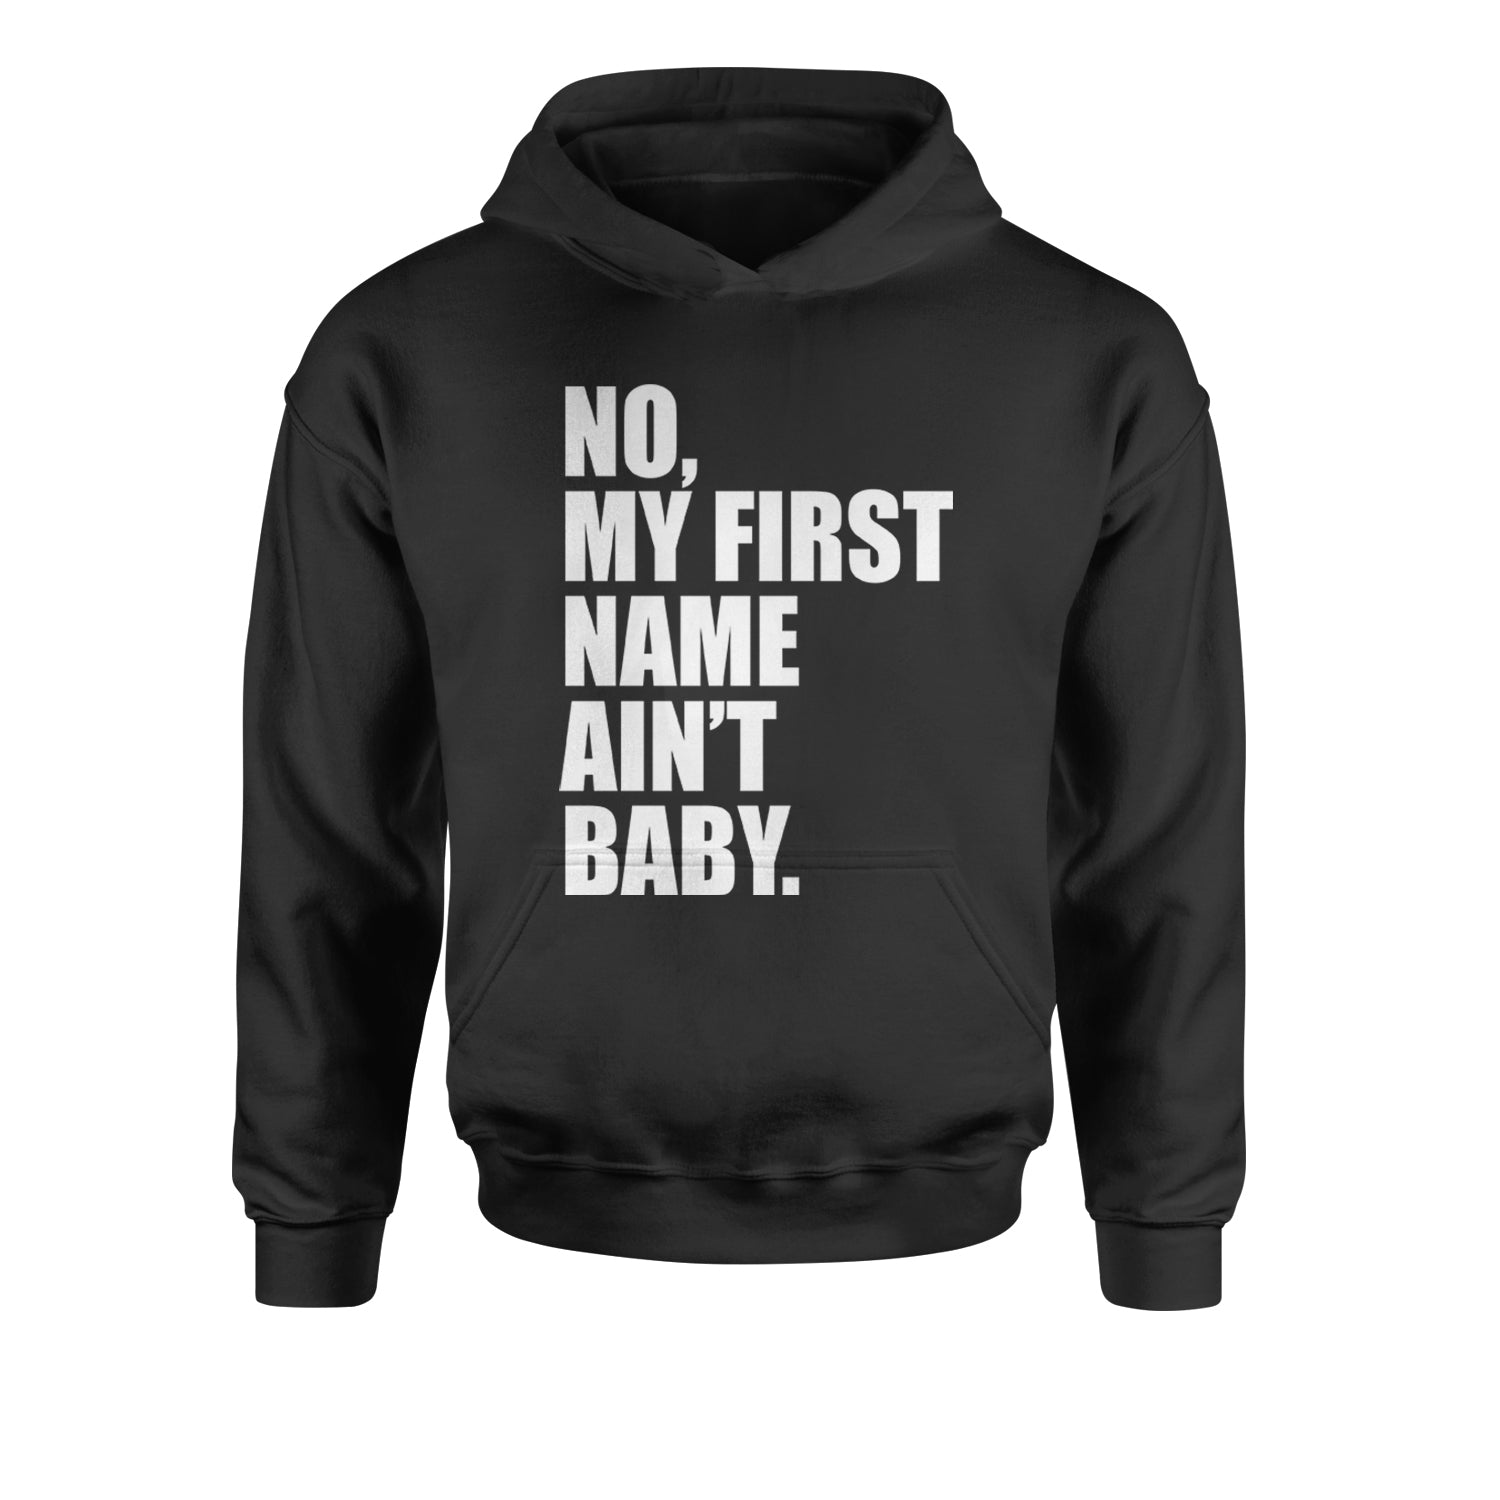 No My First Name Ain't Baby Together Again Youth-Sized Hoodie